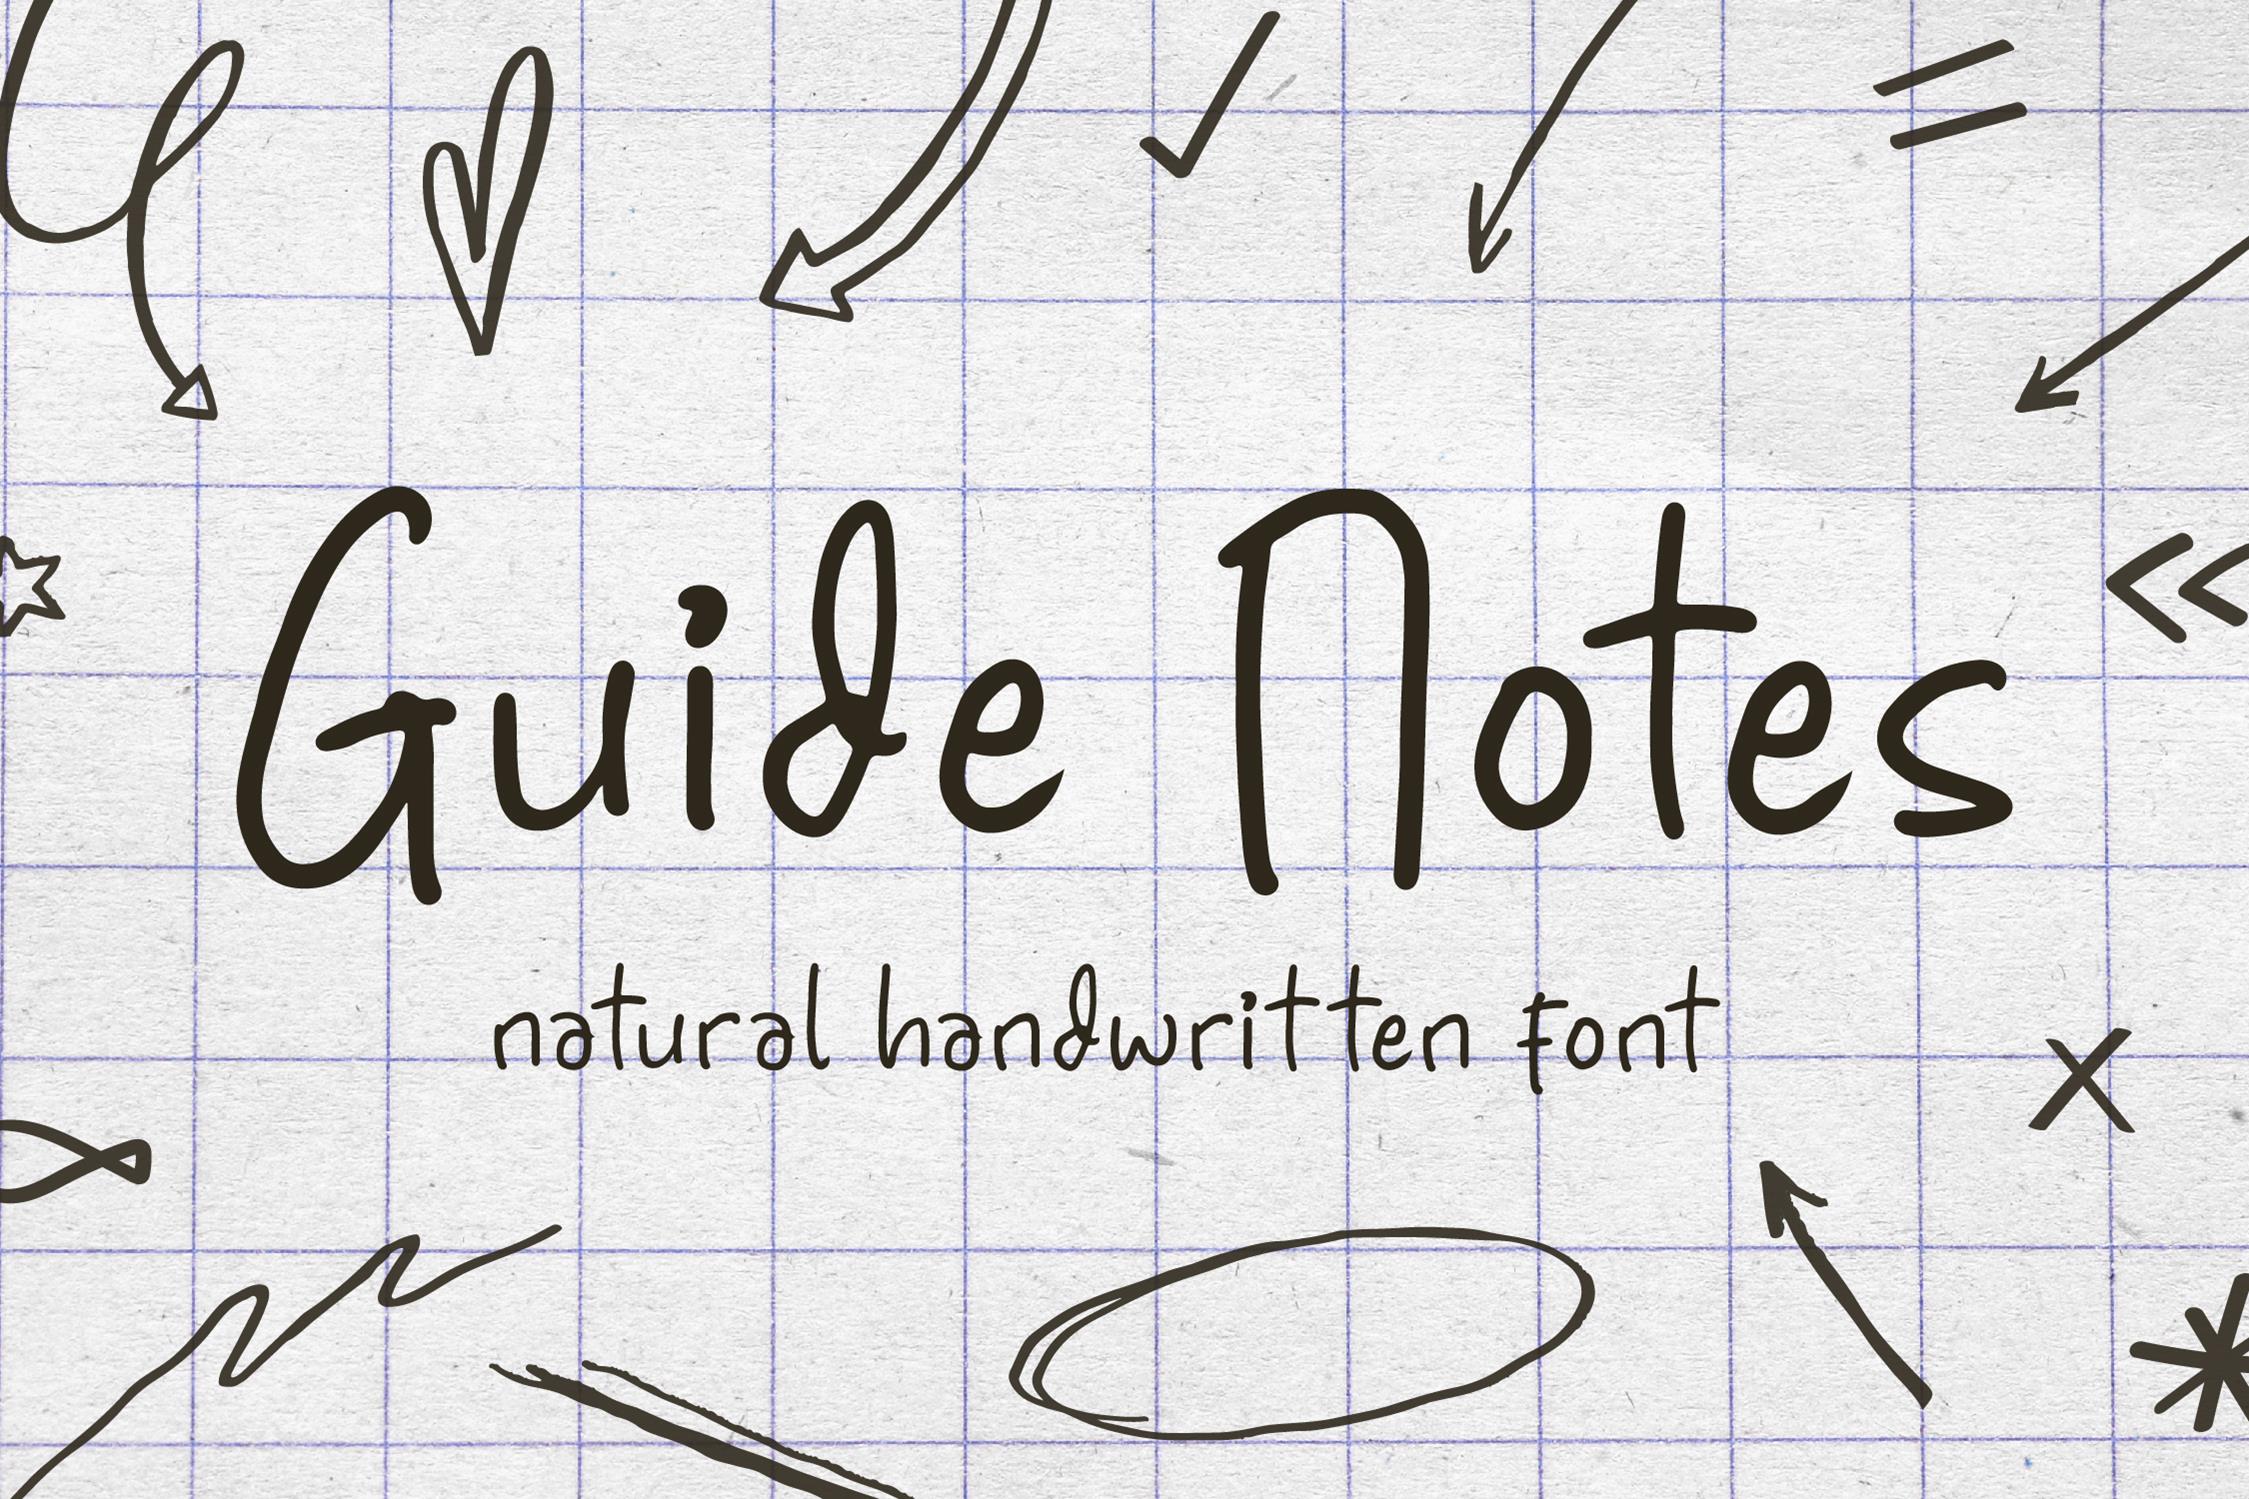 Guide Notes